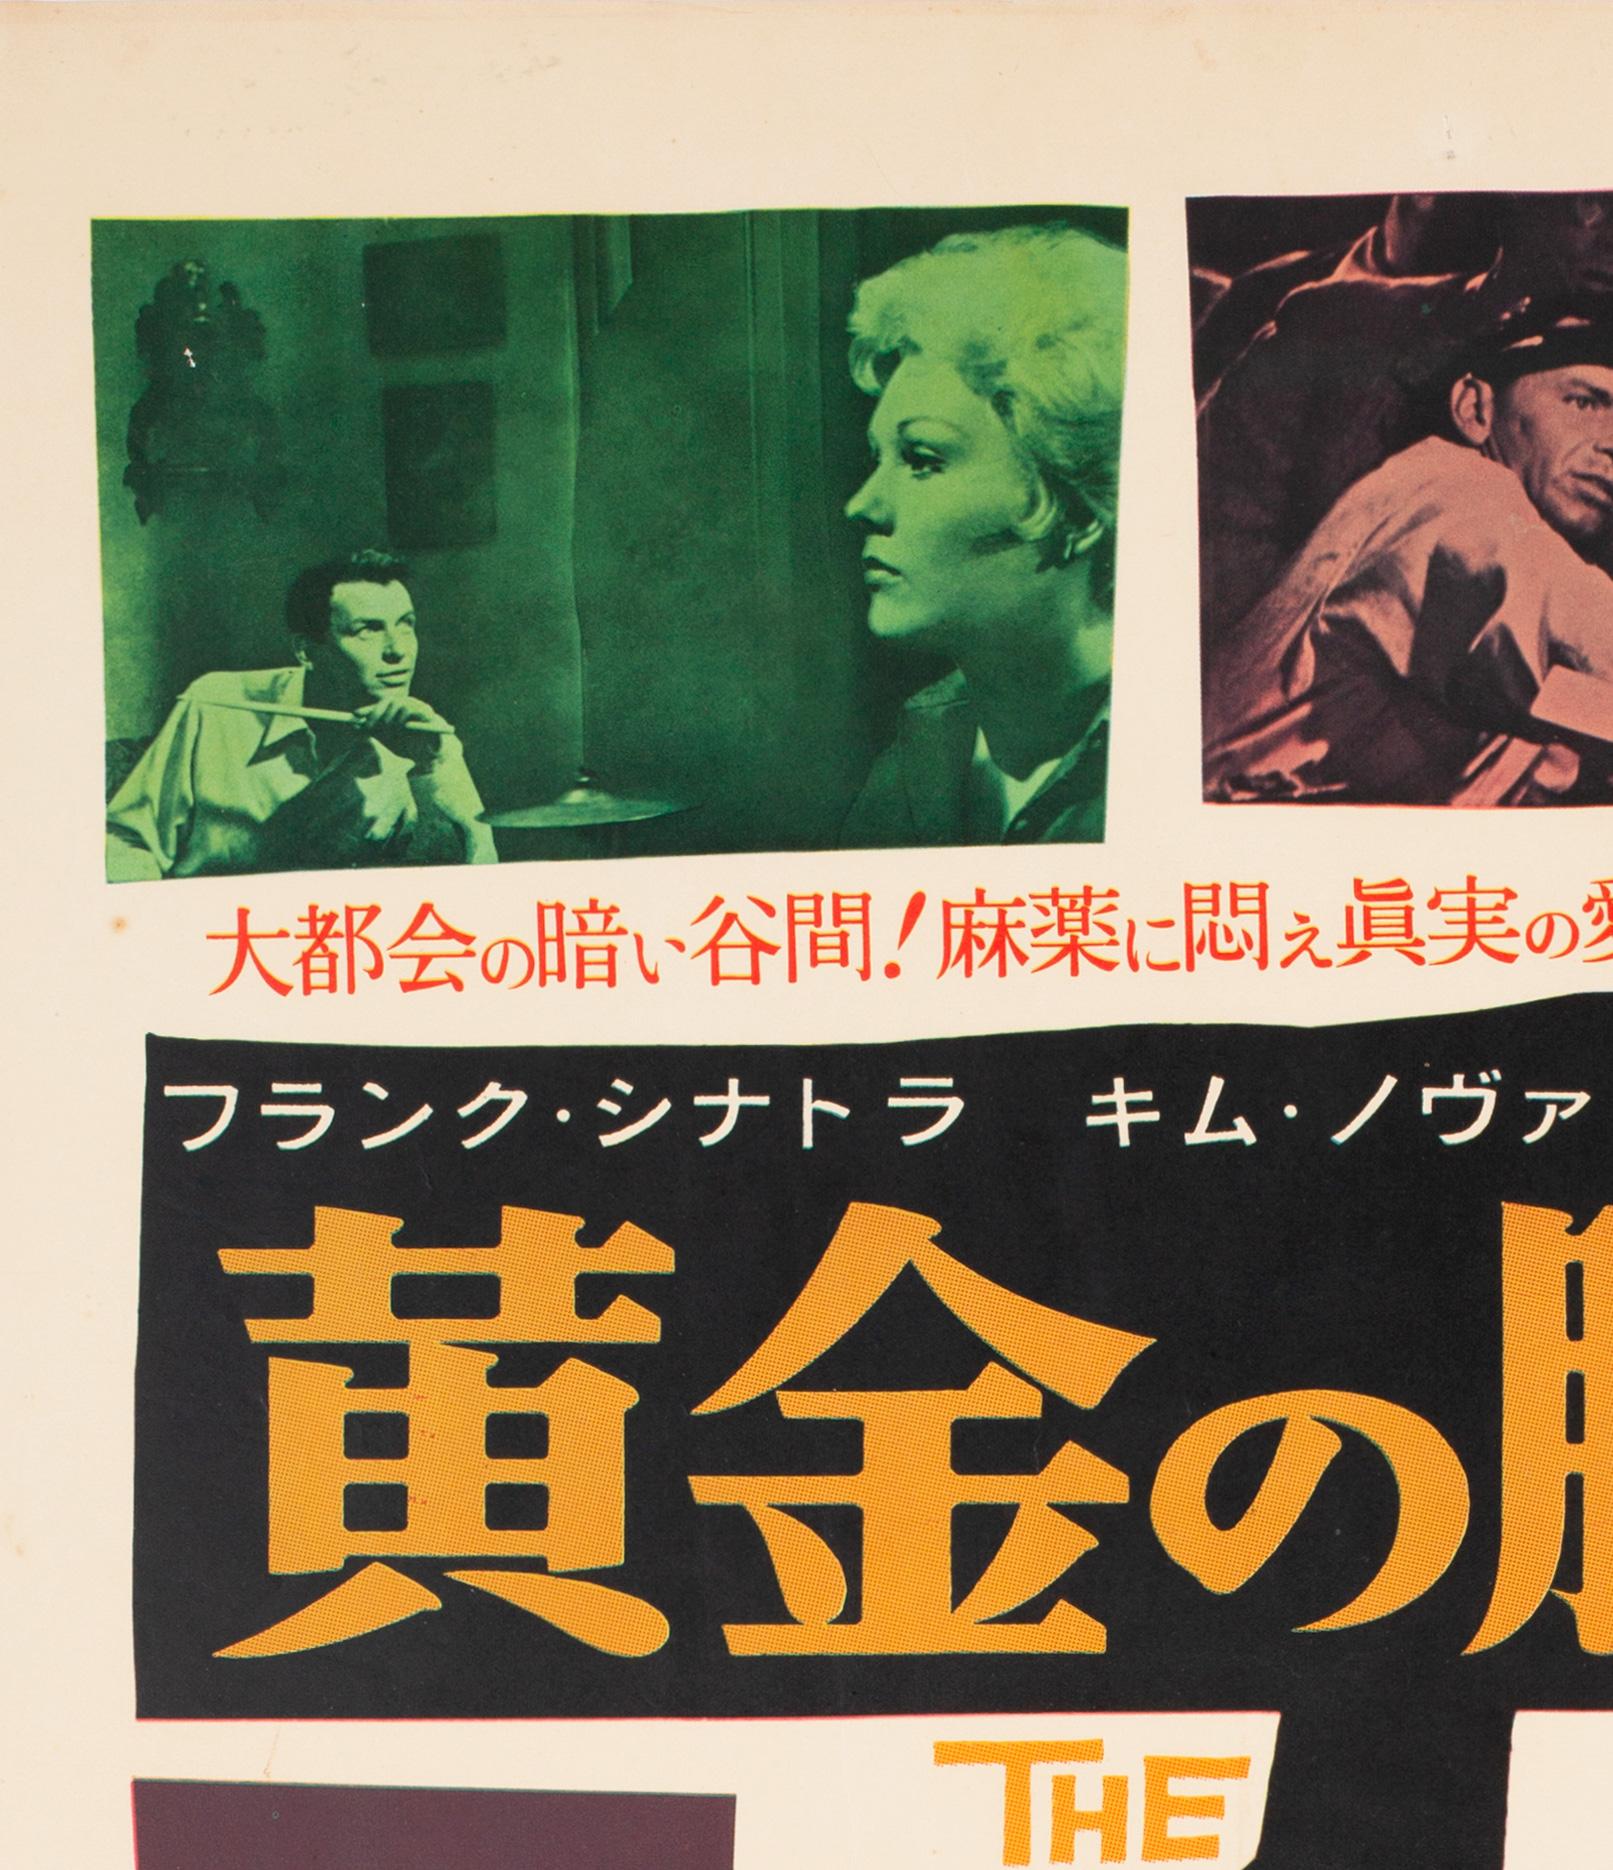 The Man with the Golden Arm 1956 Japanese B2 film poster

Incredibly rare first-year-of-release Japanese film poster for Otto Preminger 50s classic The Man with the Golden Arm starring Frank Sinatra, Kim Novak and Eleanor Parker.

This original